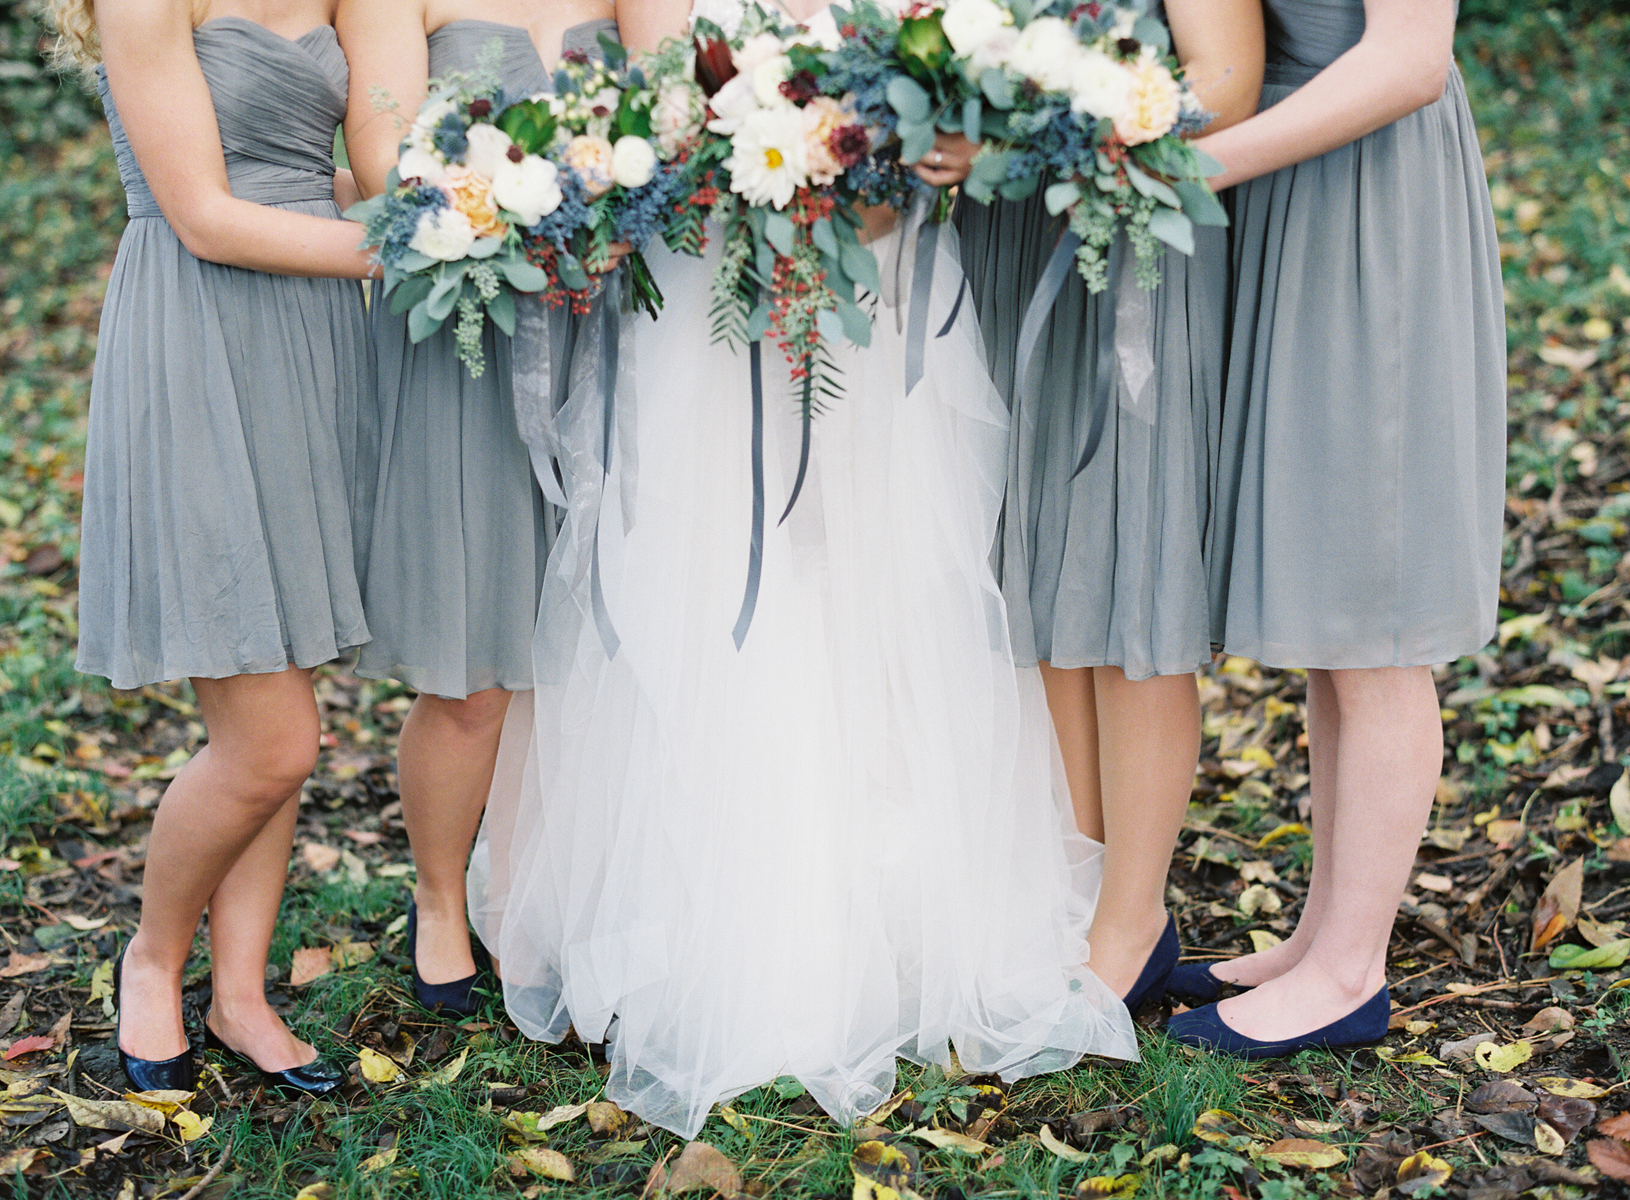 Grey bridesmaids dresses, bouquets with pops of peach, burgundy, and navy // Nashville Wedding Florist